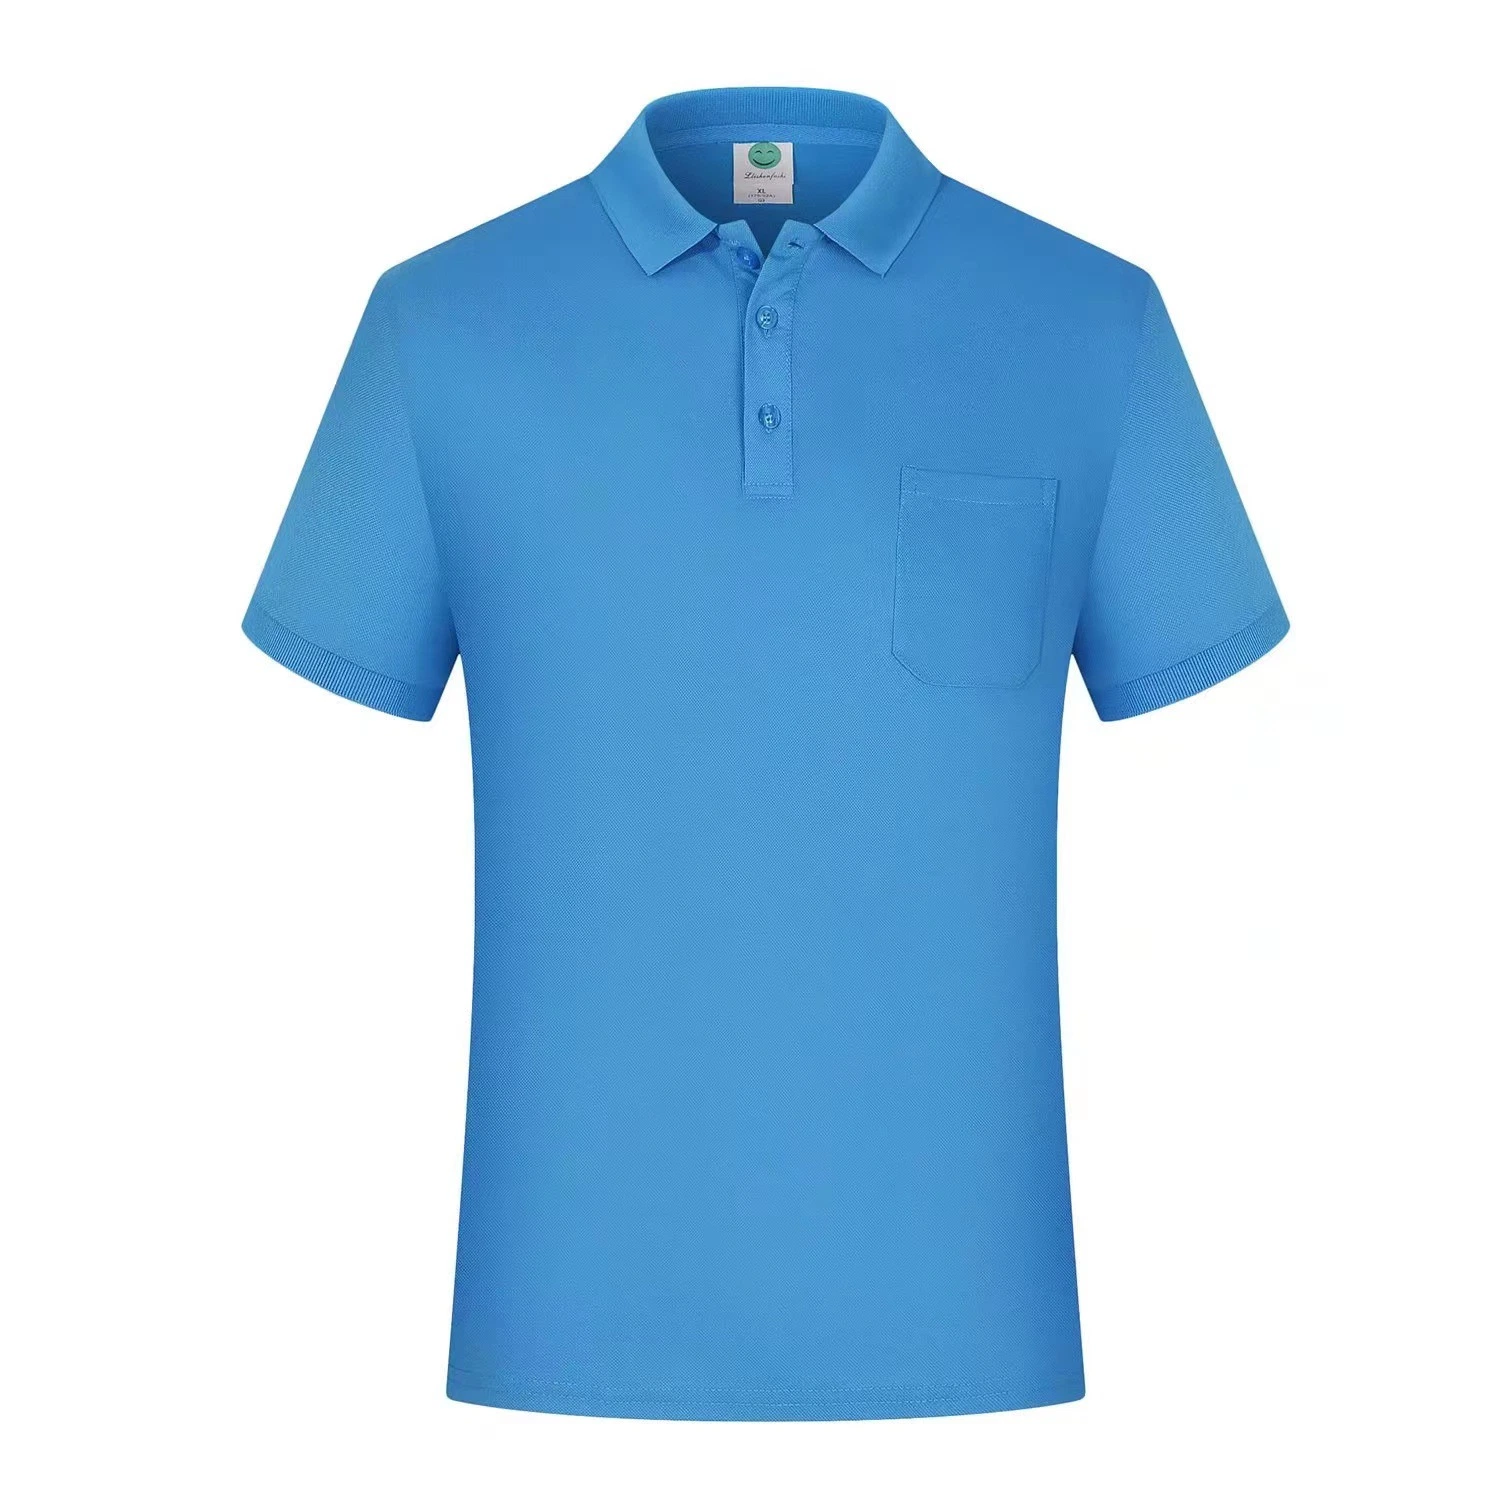 Work Clothes Printing T-Shirt Unisex Polo Shirt with Pocket